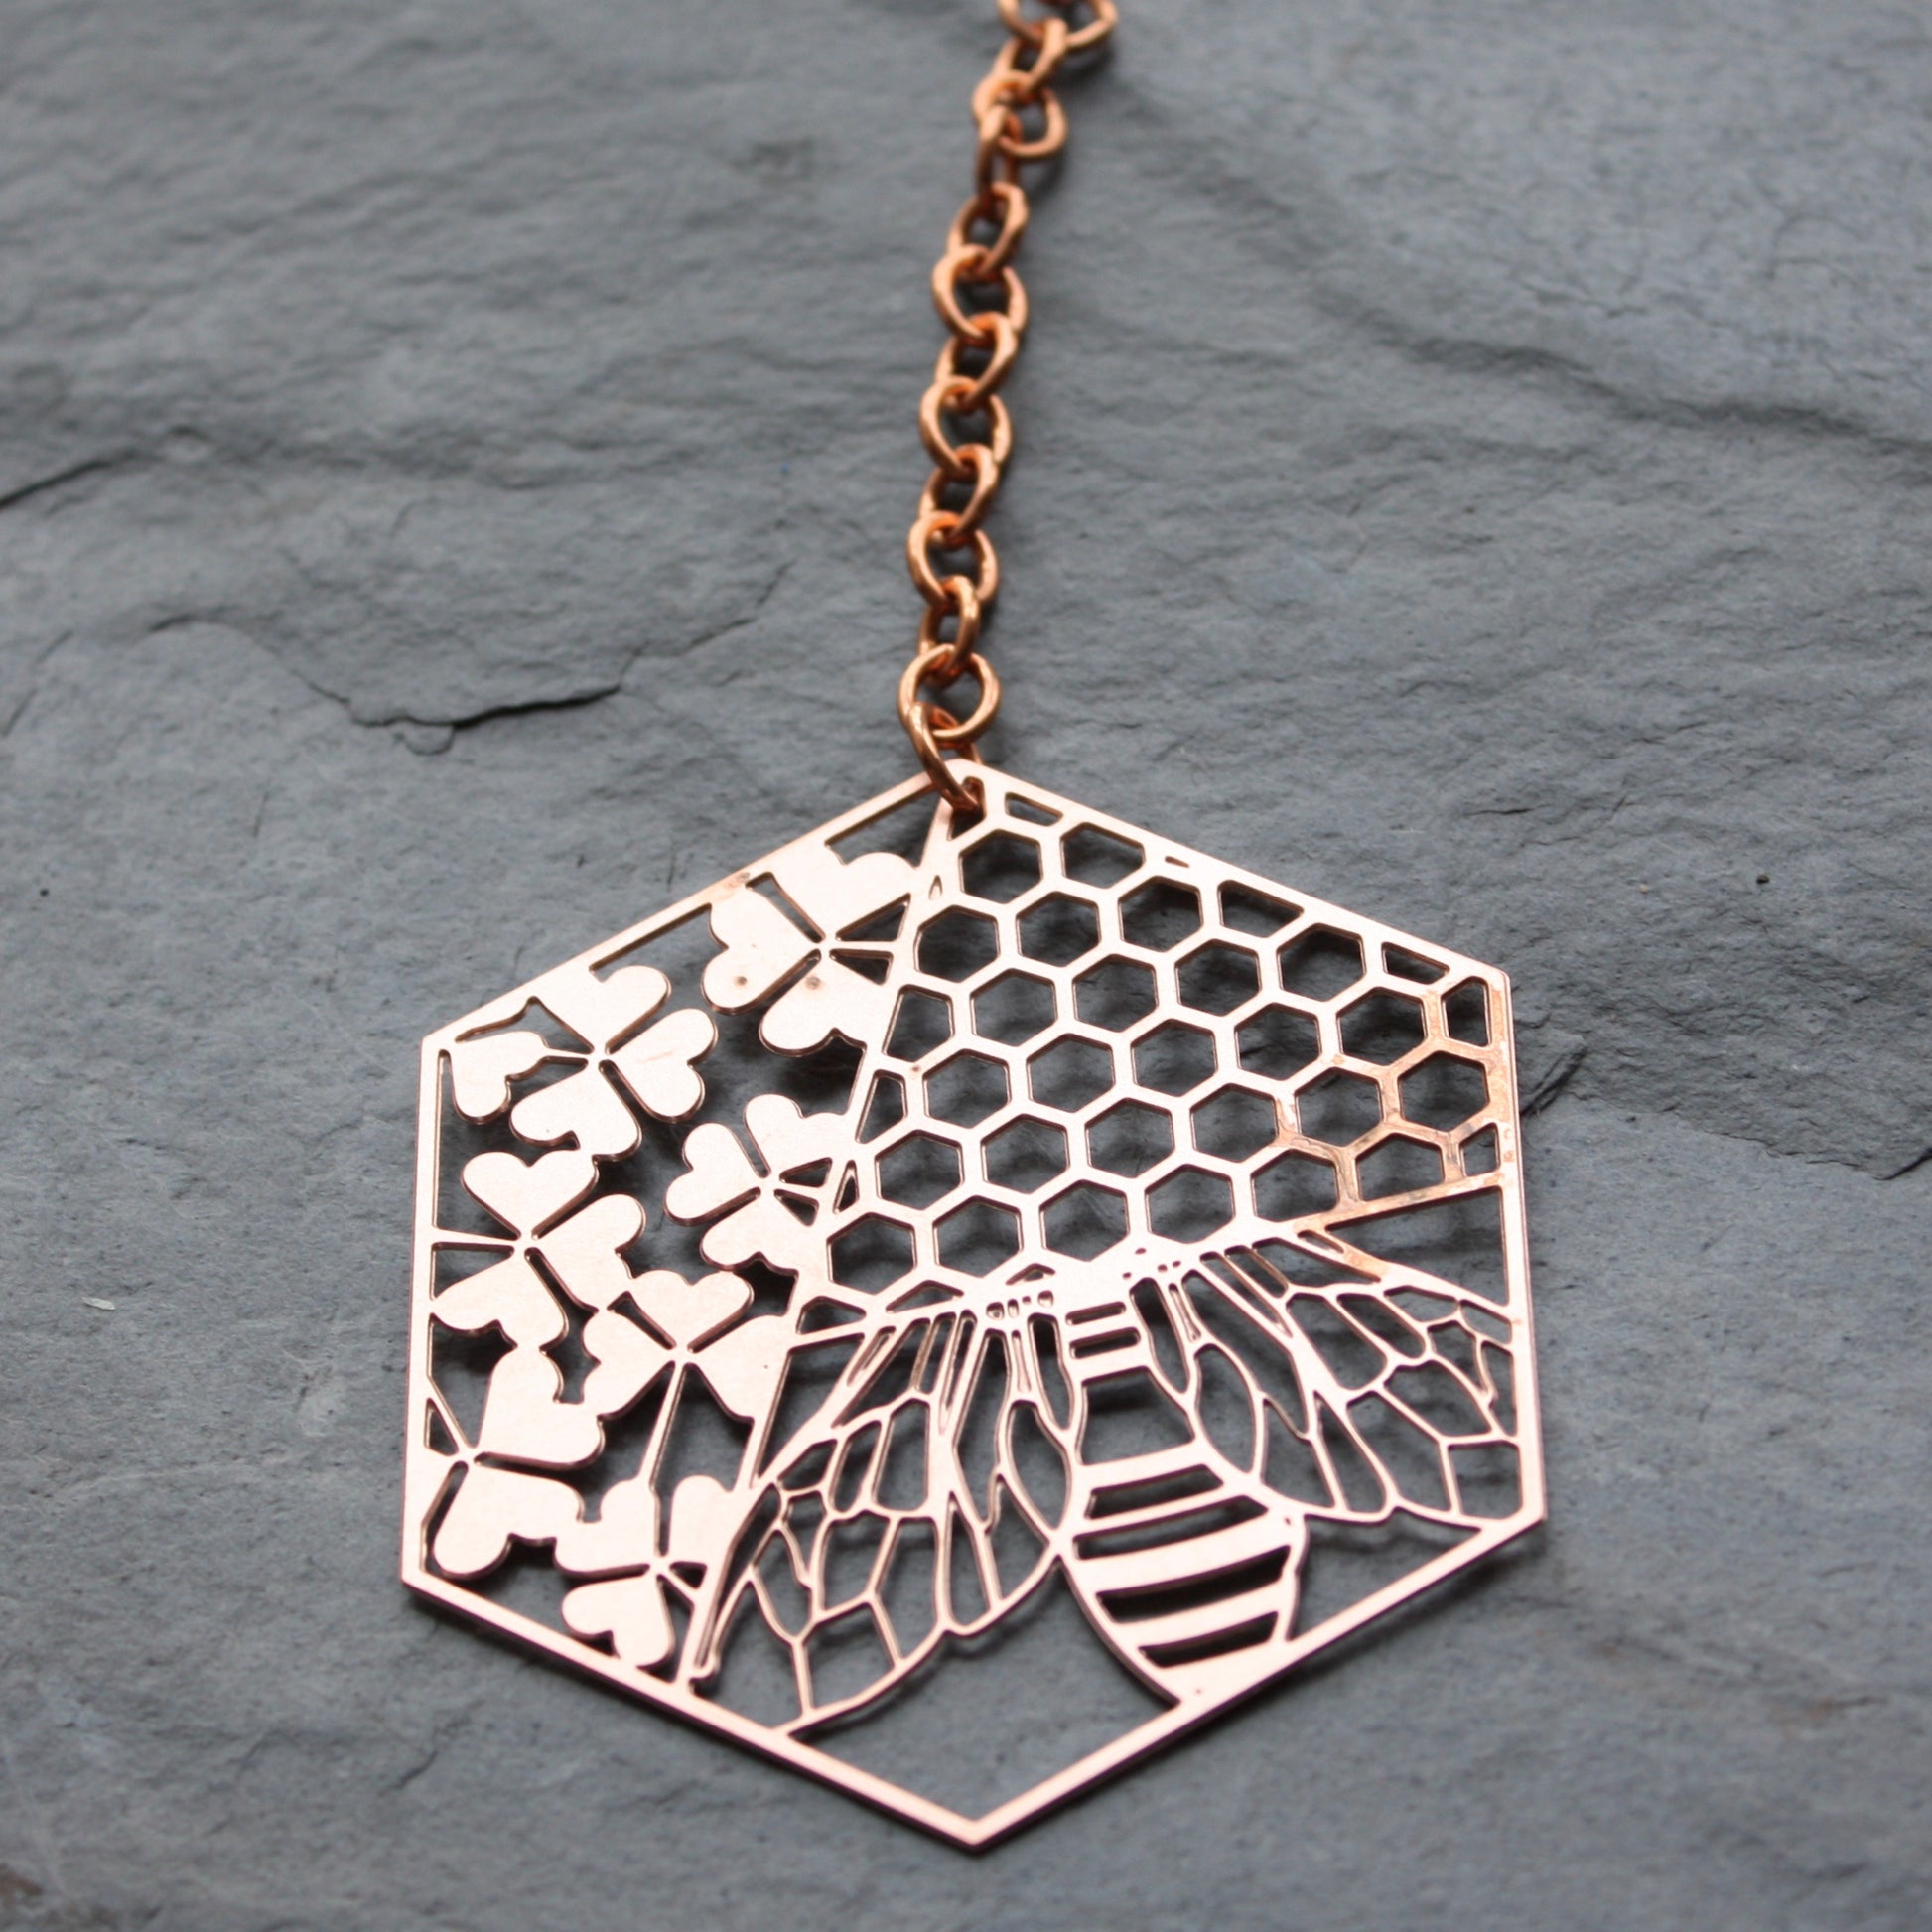 copper sun catcher bee, clover & honeycomb design by audra azoury